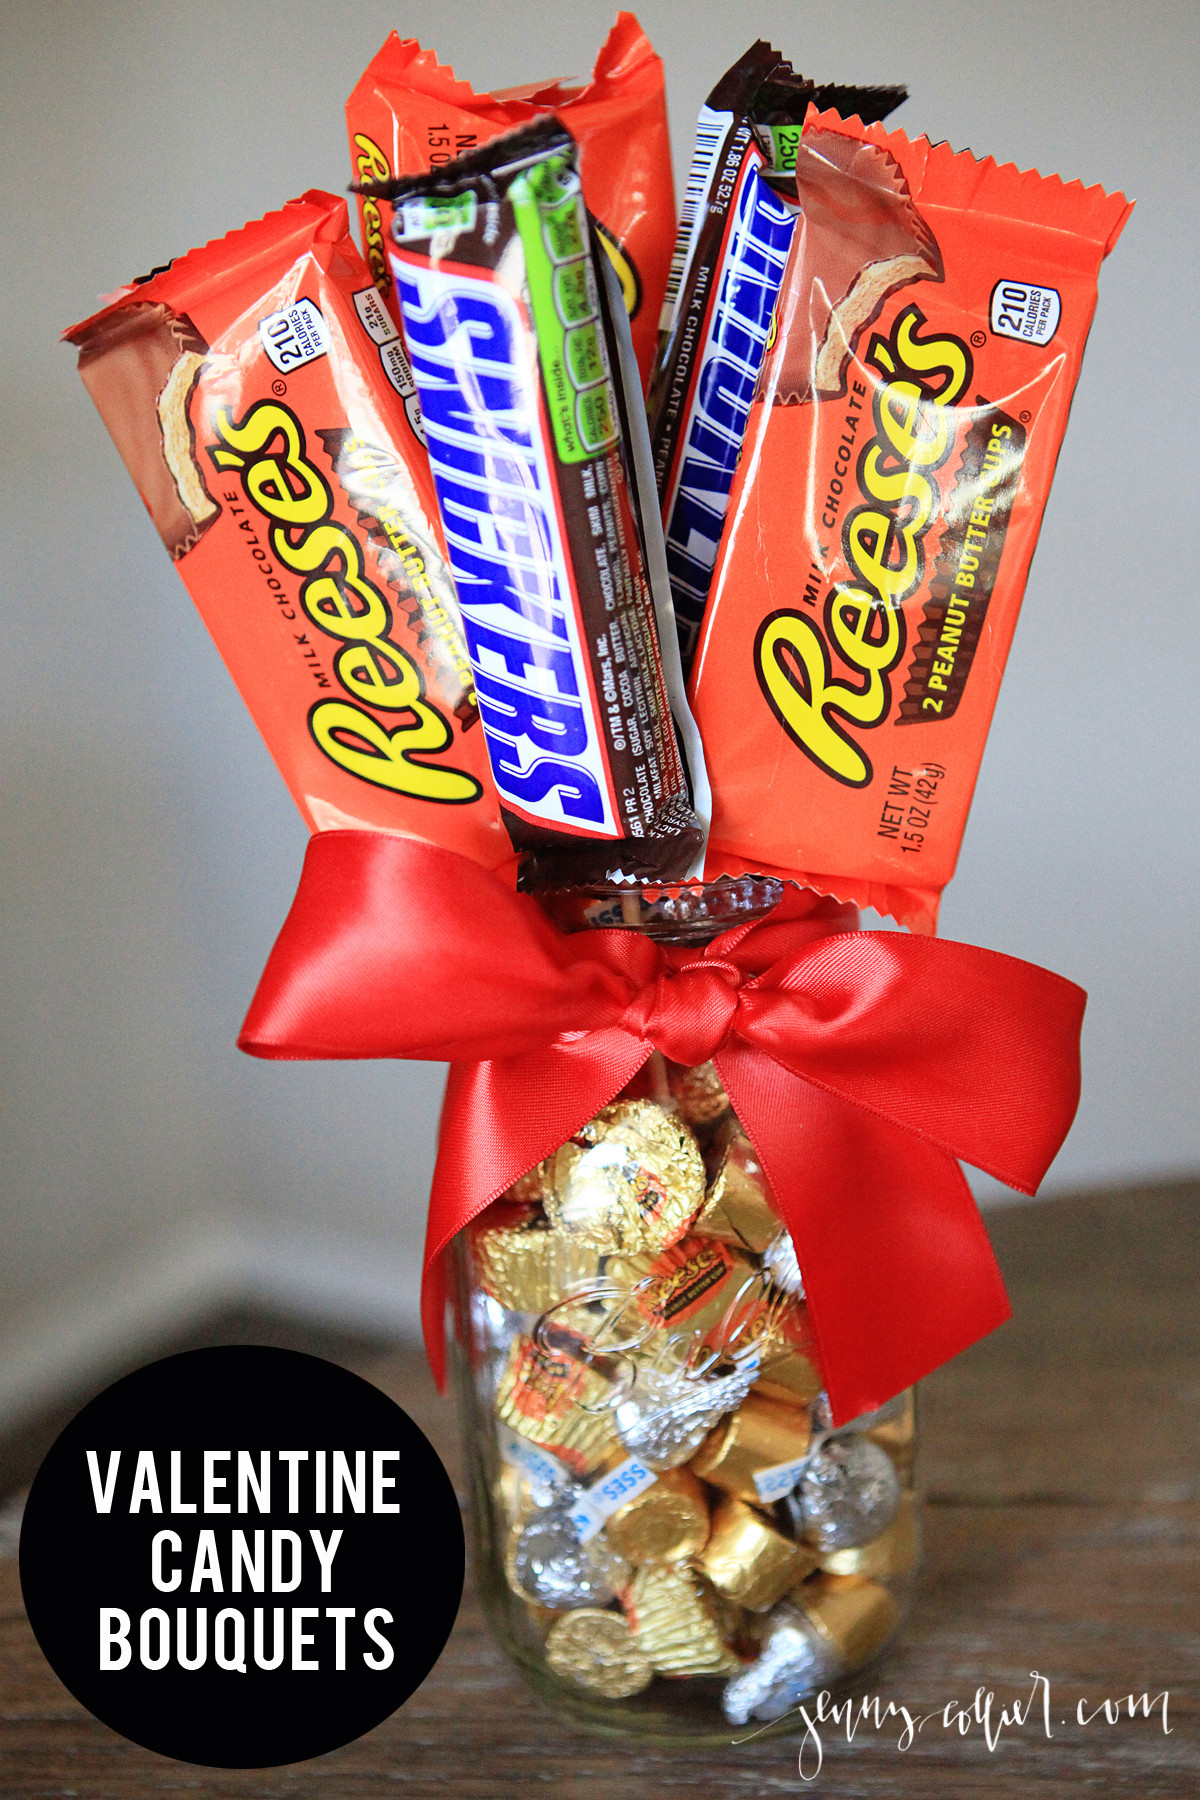 Valentines Day Candy Gift Ideas
 Valentine Candy Bouquets